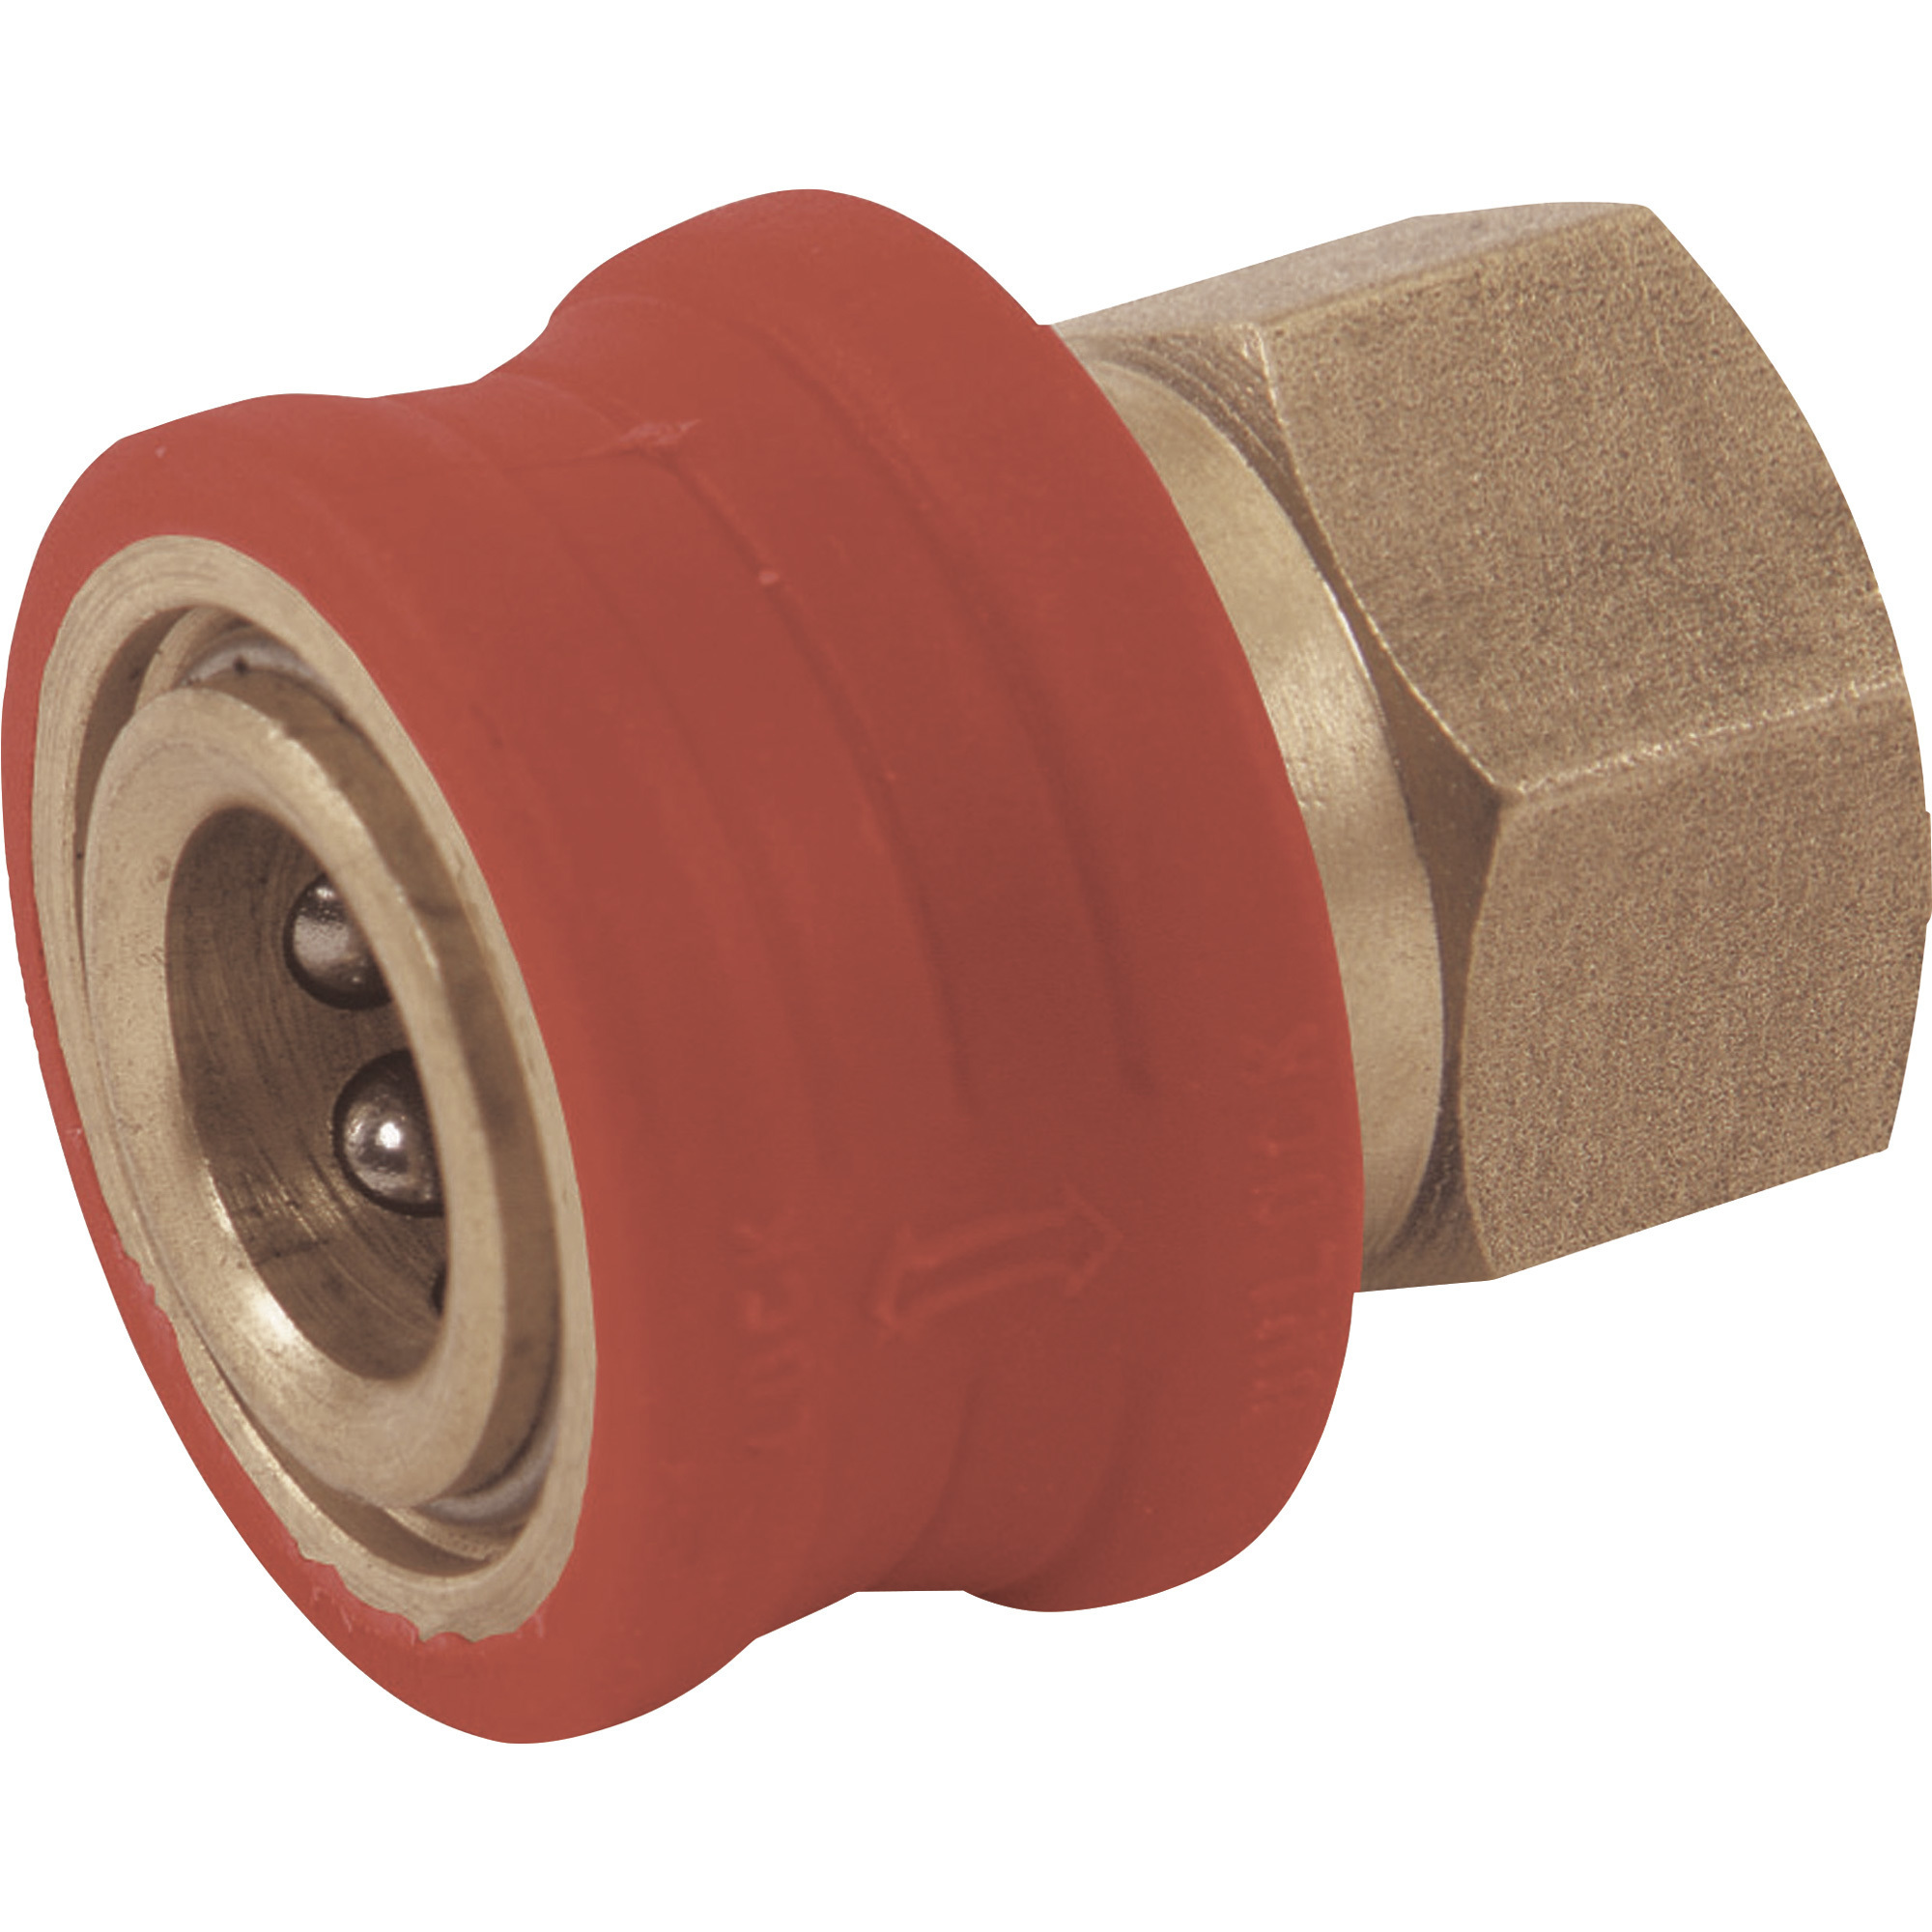 NorthStar Pressure Washer Insulated Quick-Connect Coupler â 1/4Inch NPT-F, 5000 PSI, 12.0 GPM, Brass, Model 2100381P